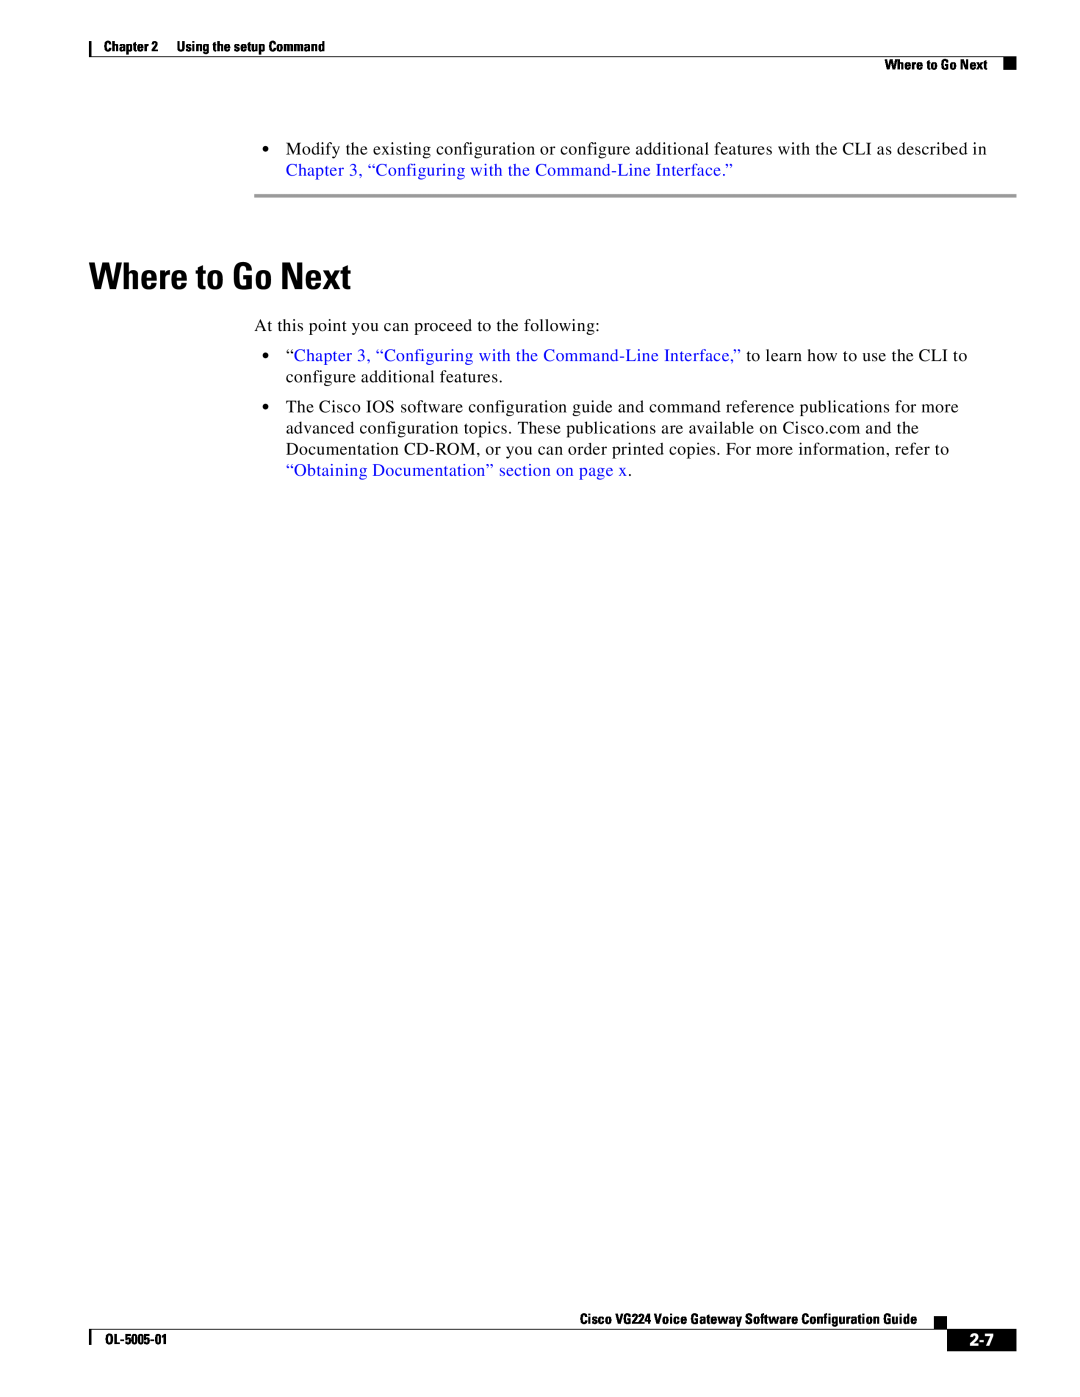 Cisco Systems VG224 manual Where to Go Next, At this point you can proceed to the following 